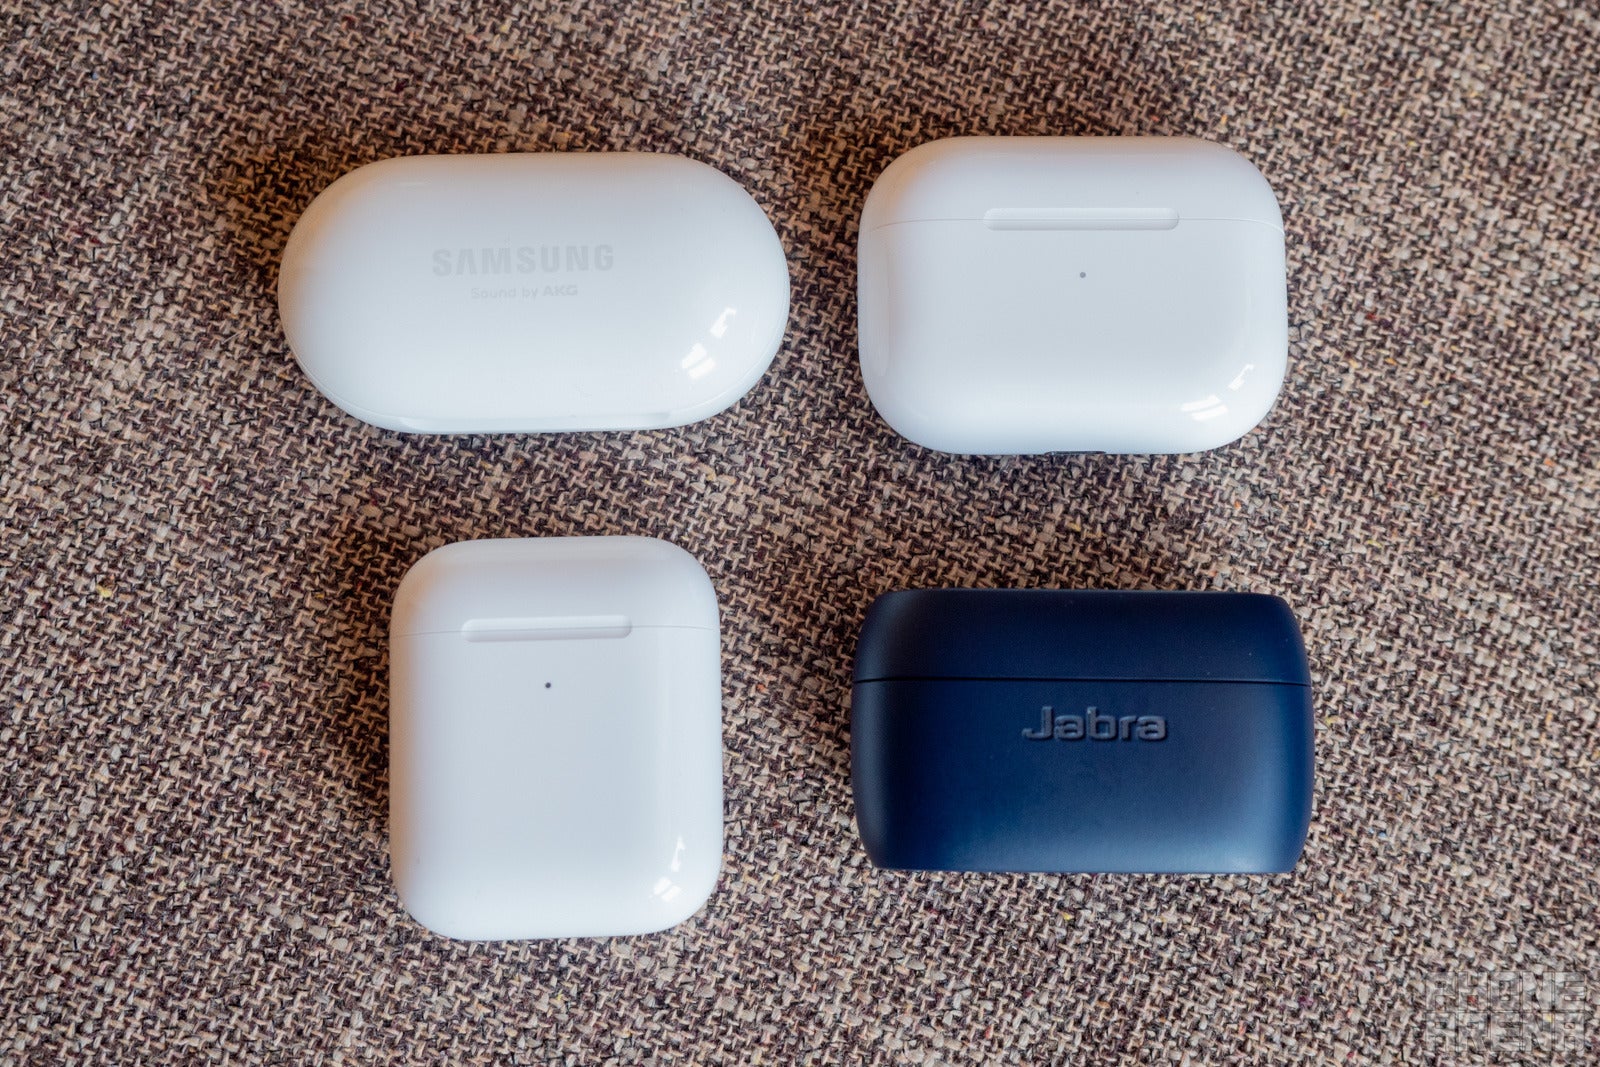 All four carrying cases are relatively small and fit nicely in a pocket - Samsung Galaxy Buds+ vs AirPods Pro, AirPods, Jabra Elite Active 75t